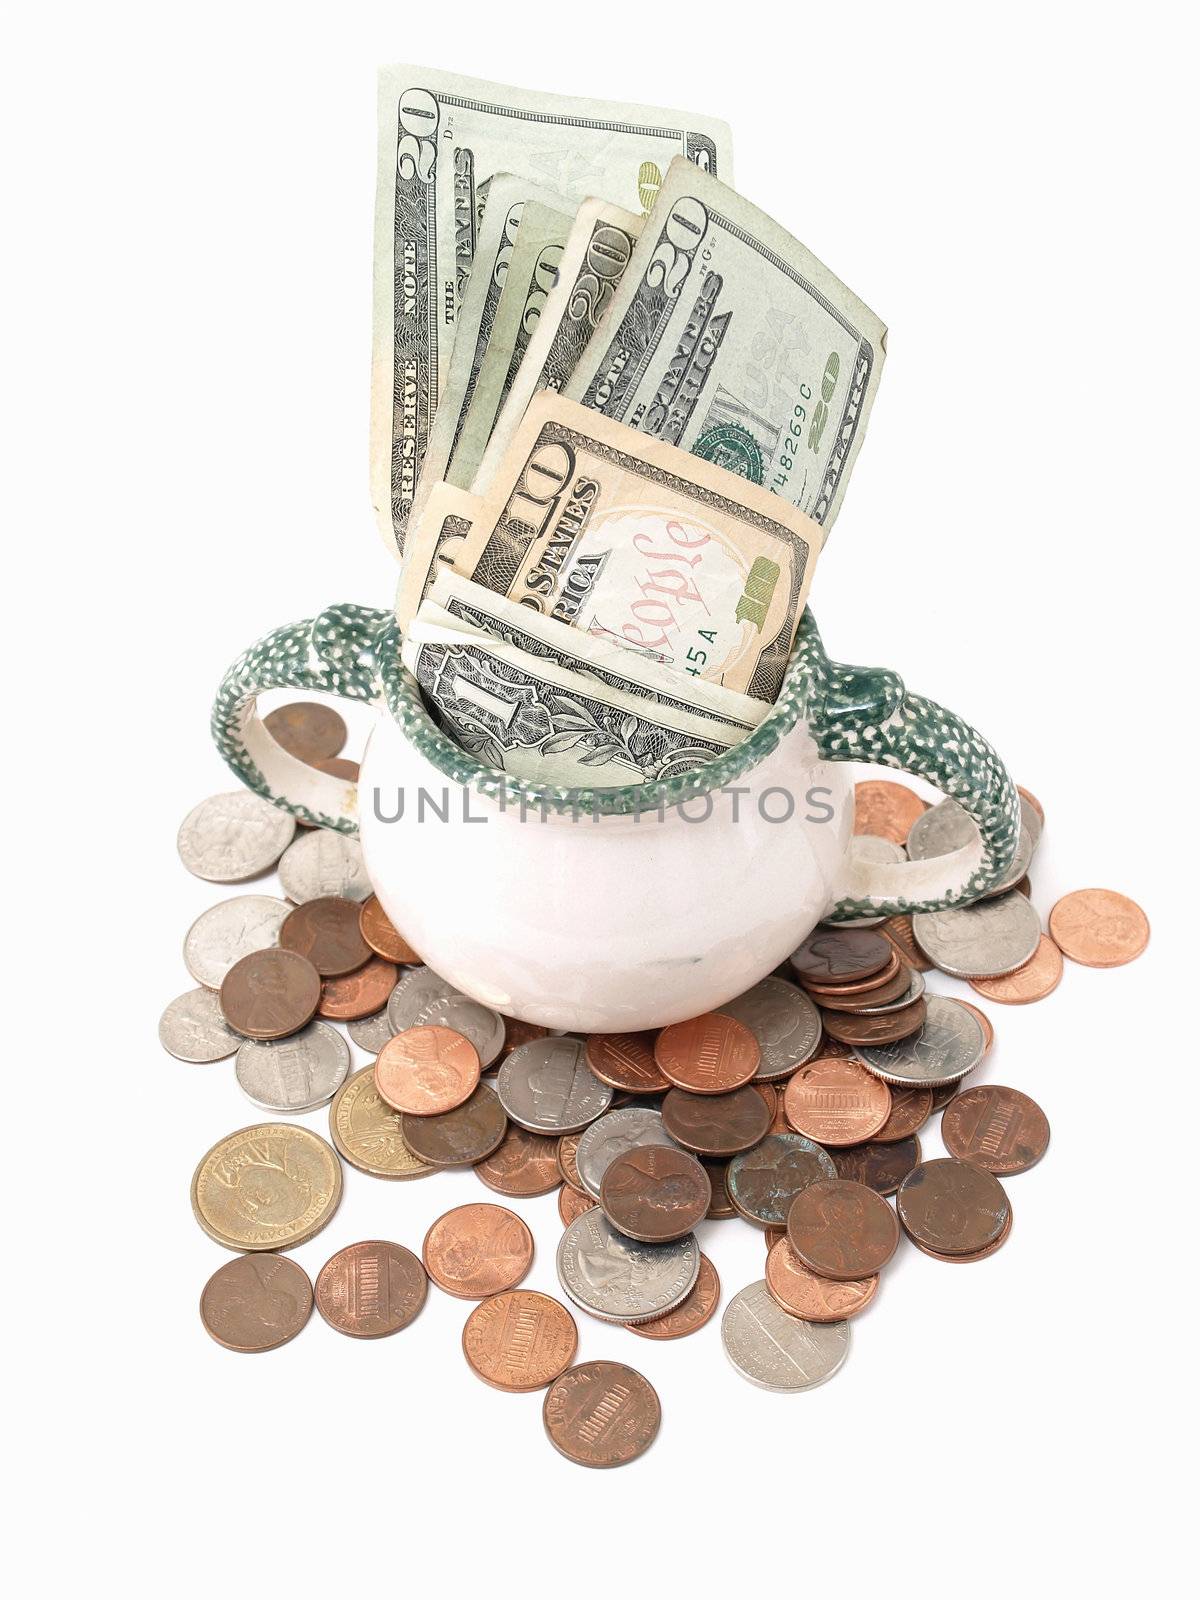 A small ceramic container holding American currency, surrounded by US coins. Over white.